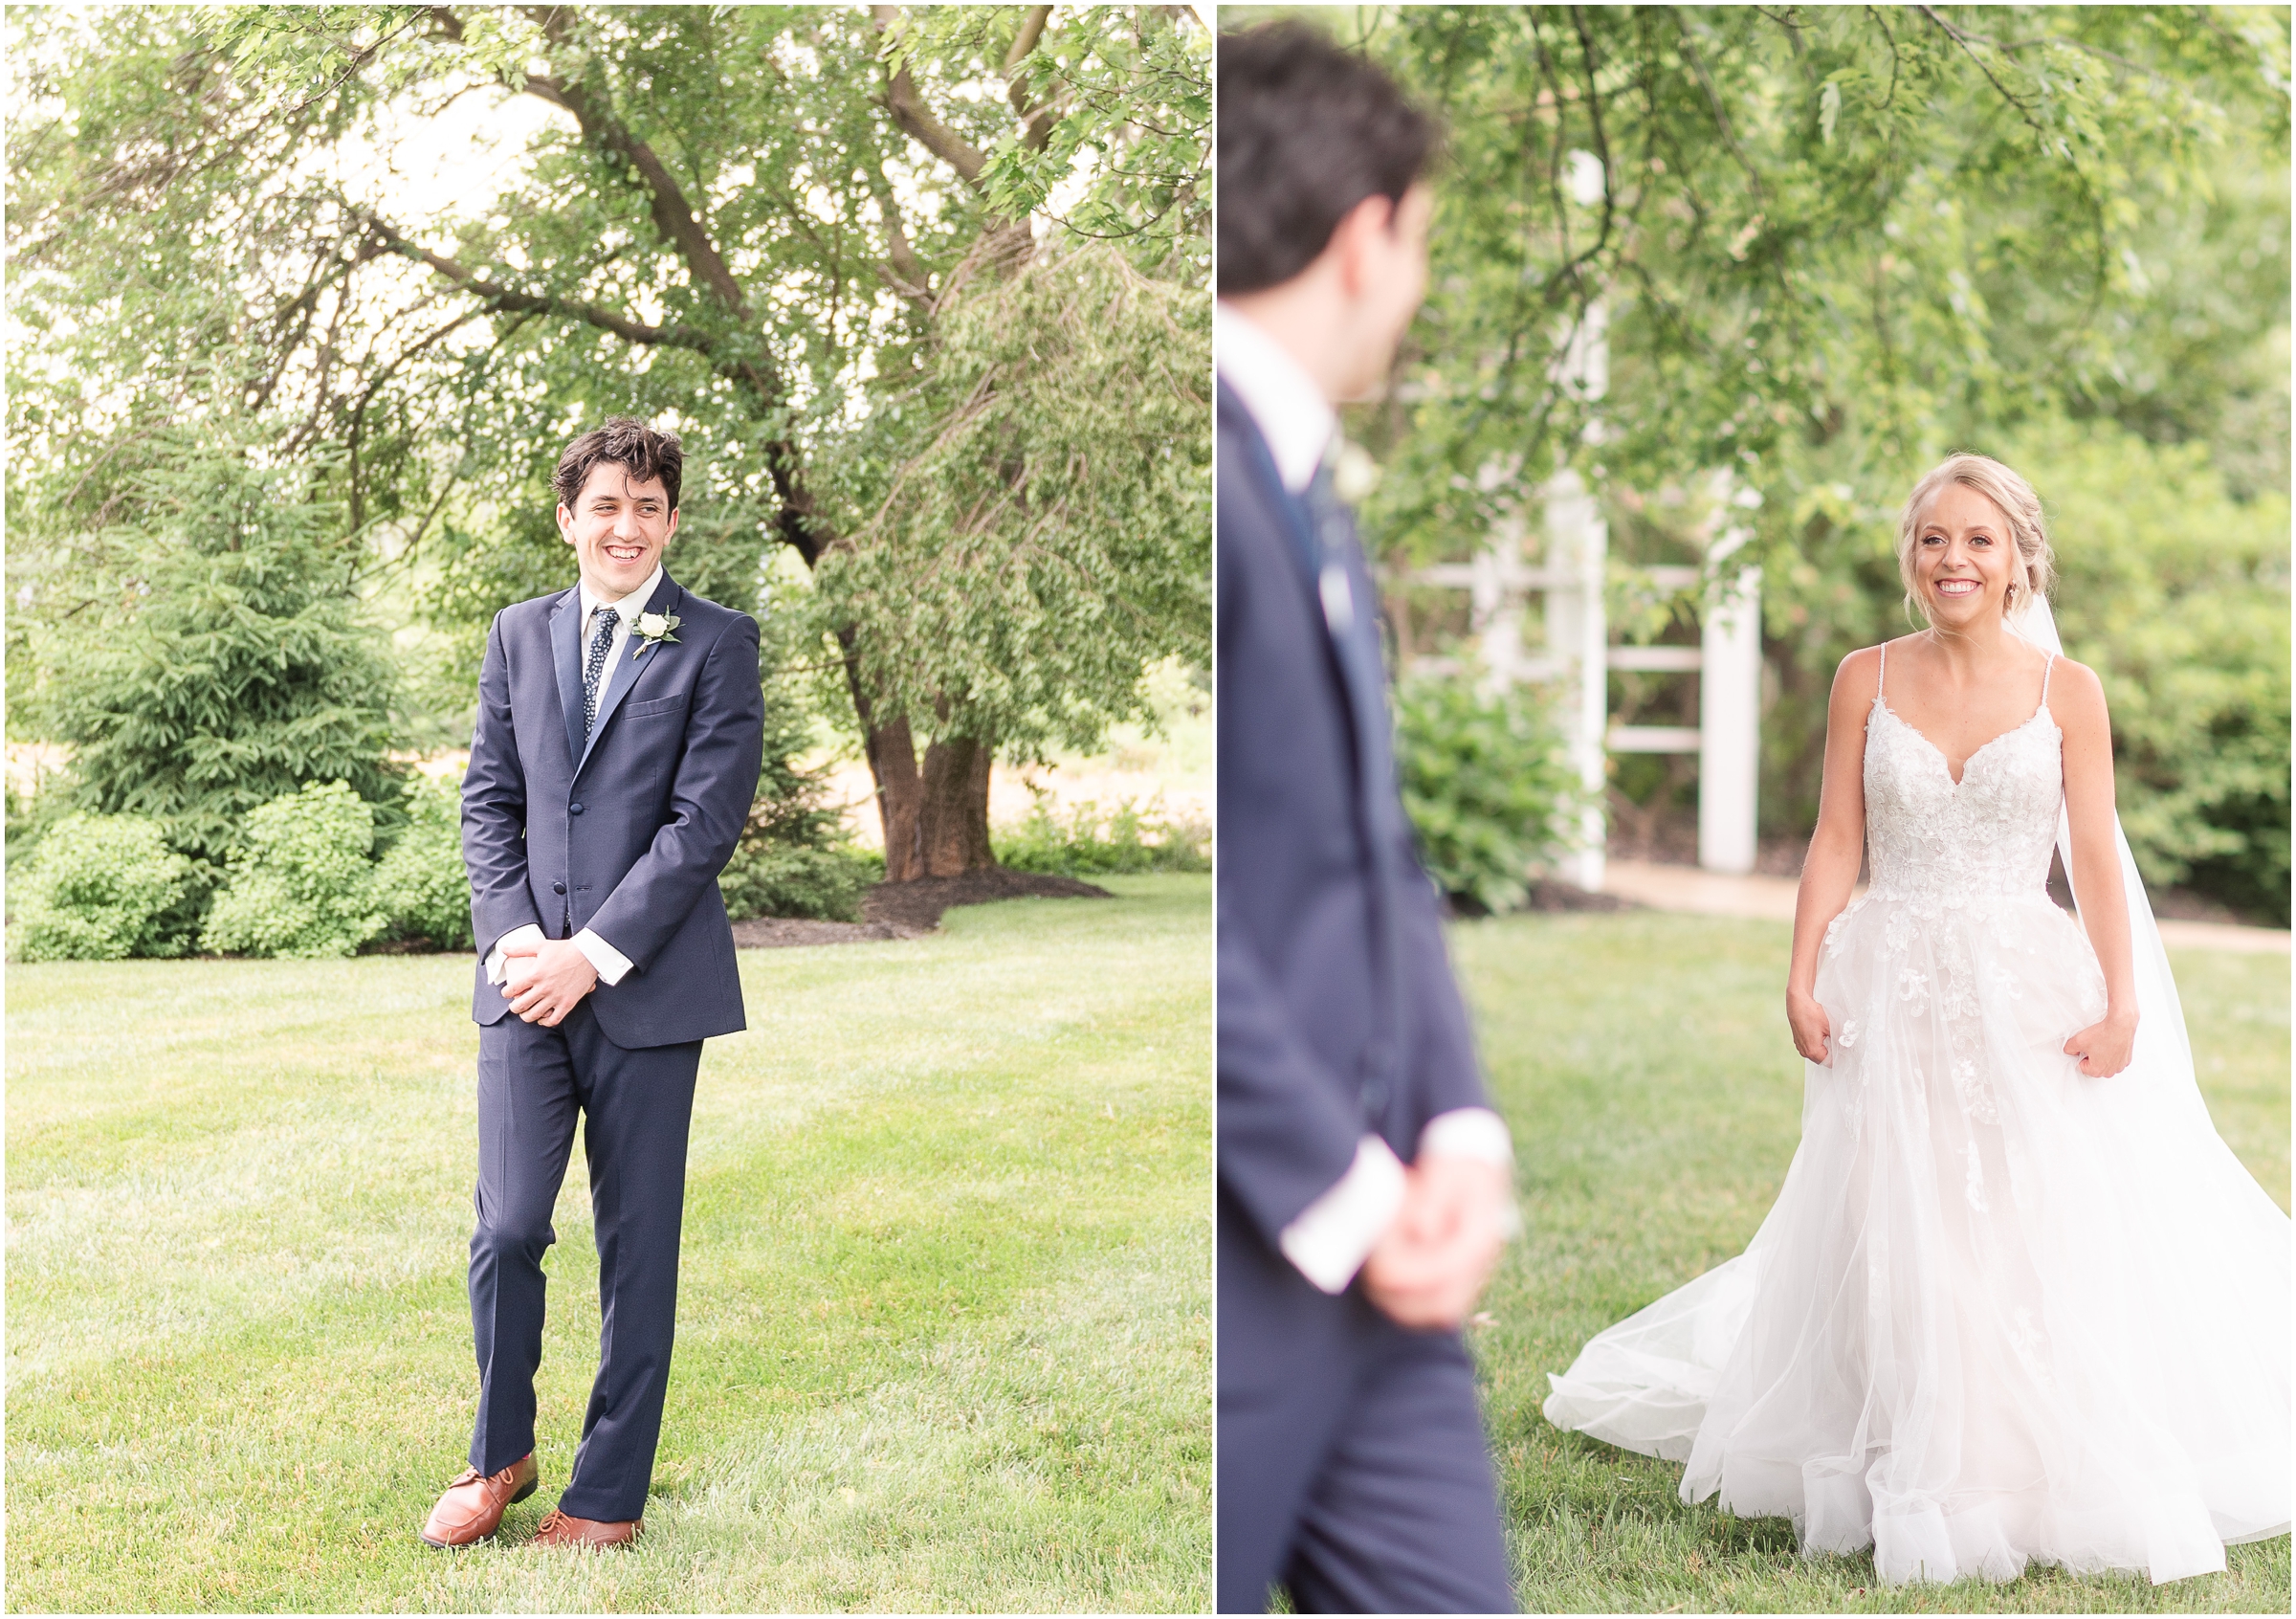 Bright and airy Indiana wedding photographer